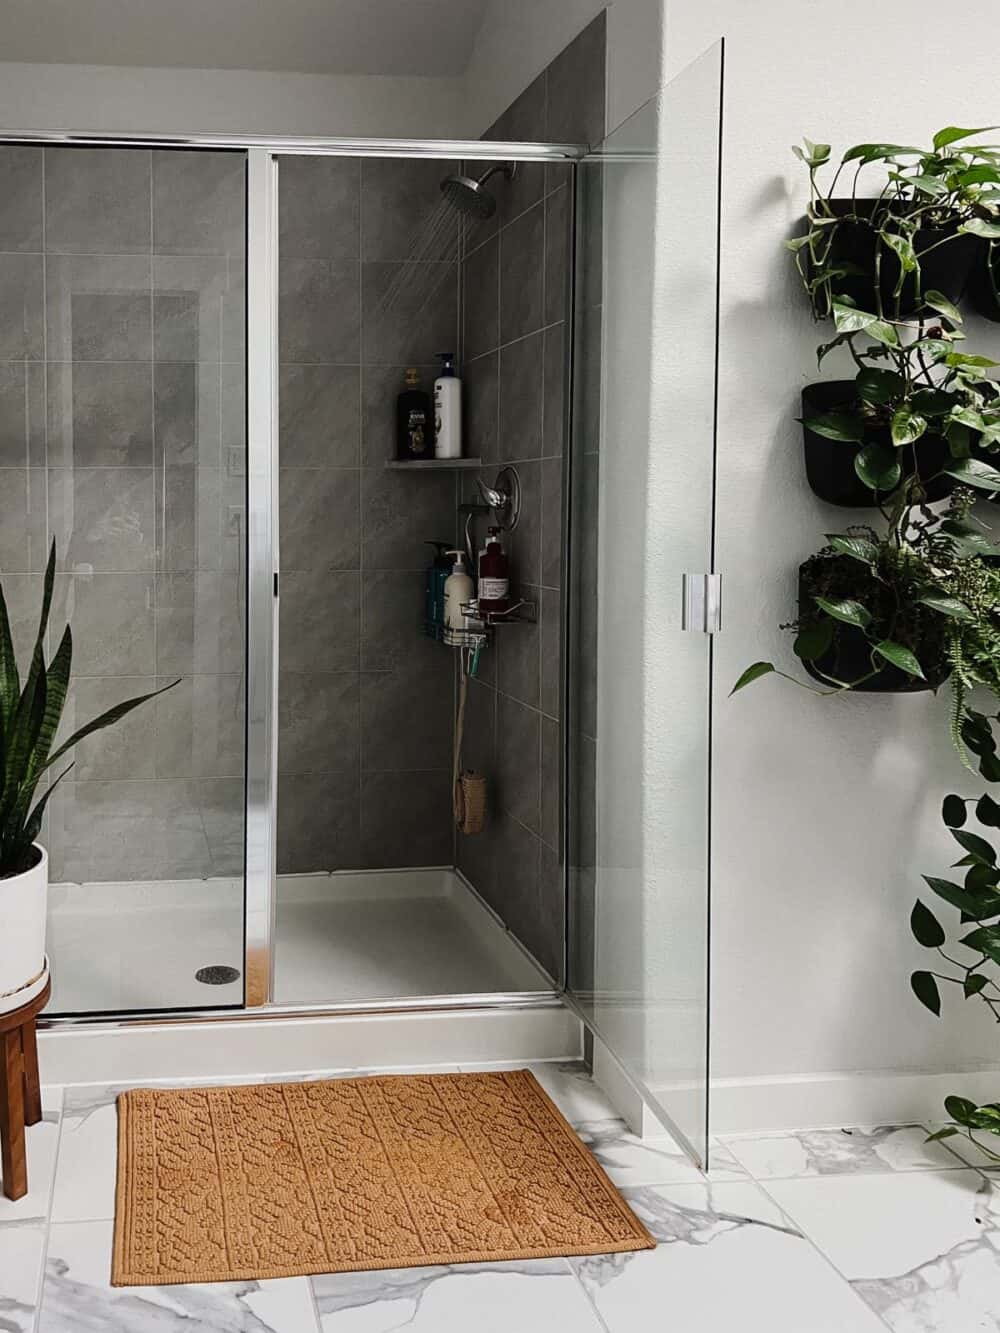 A running shower in a bathroom filled with plants 